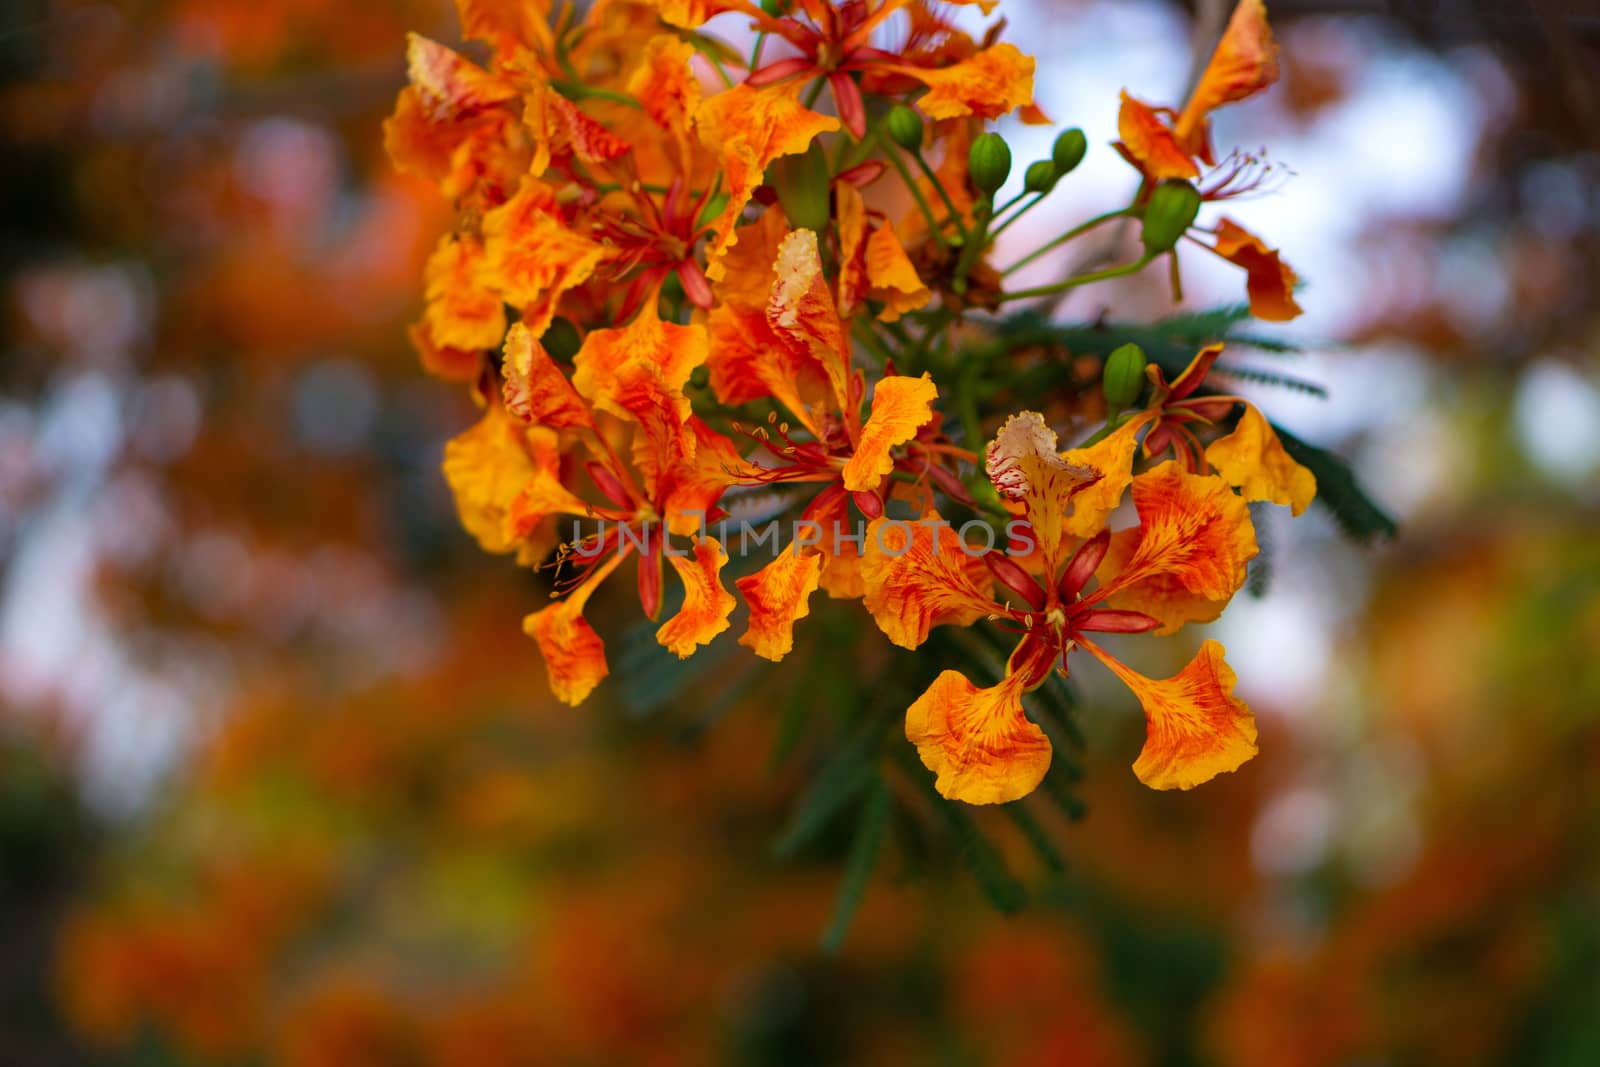 Orange Royal Poinciana in blured background by pkproject